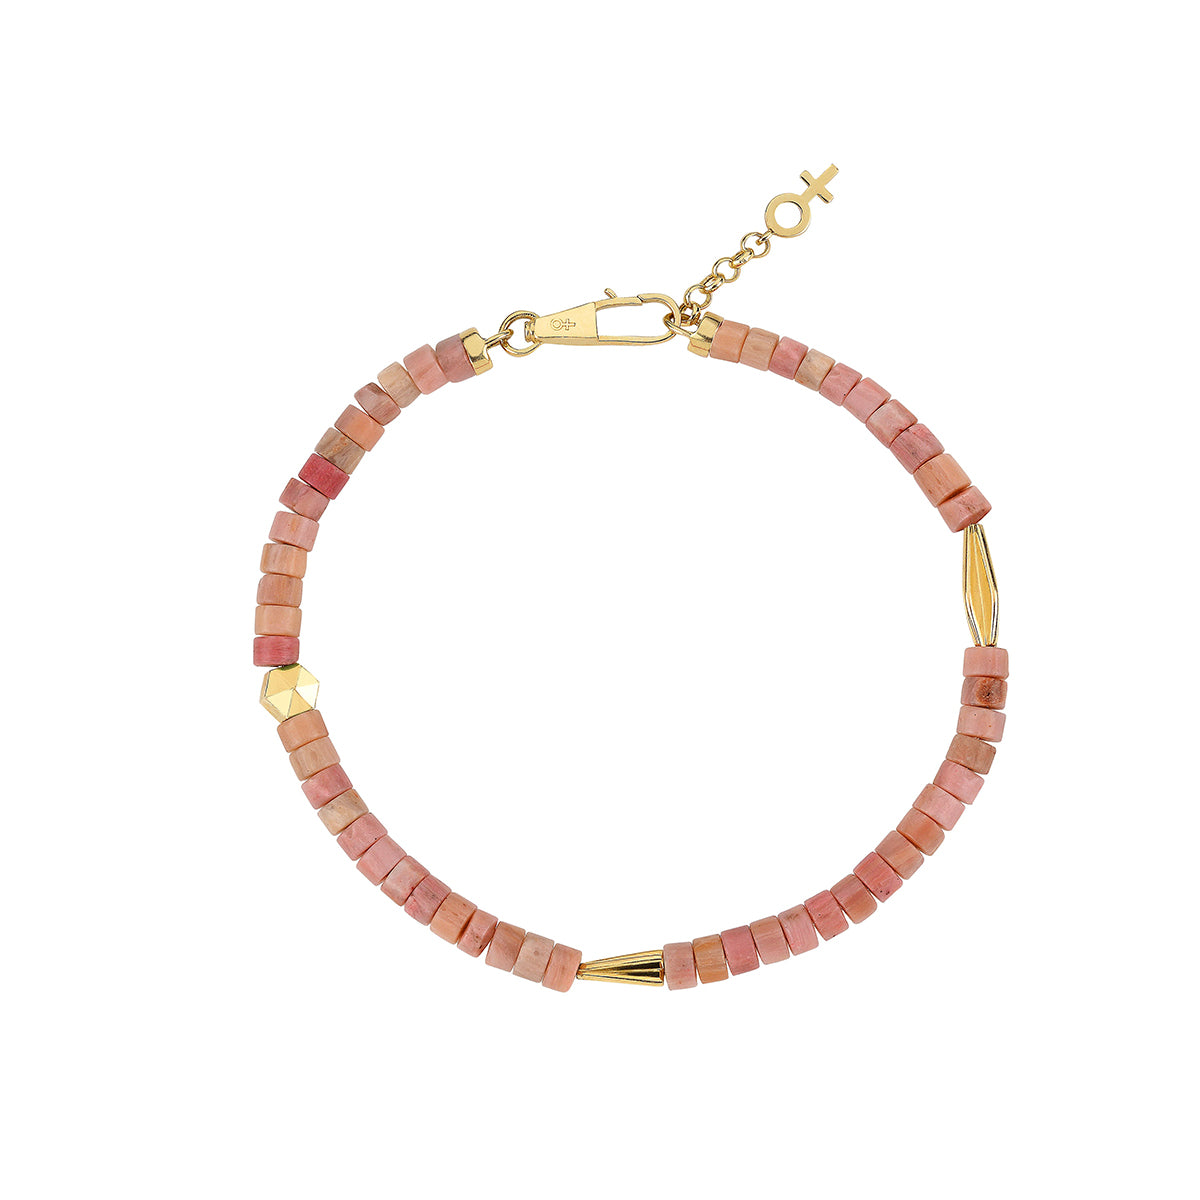 Fusion Bracelet in Yellow Gold - Her Story Shop